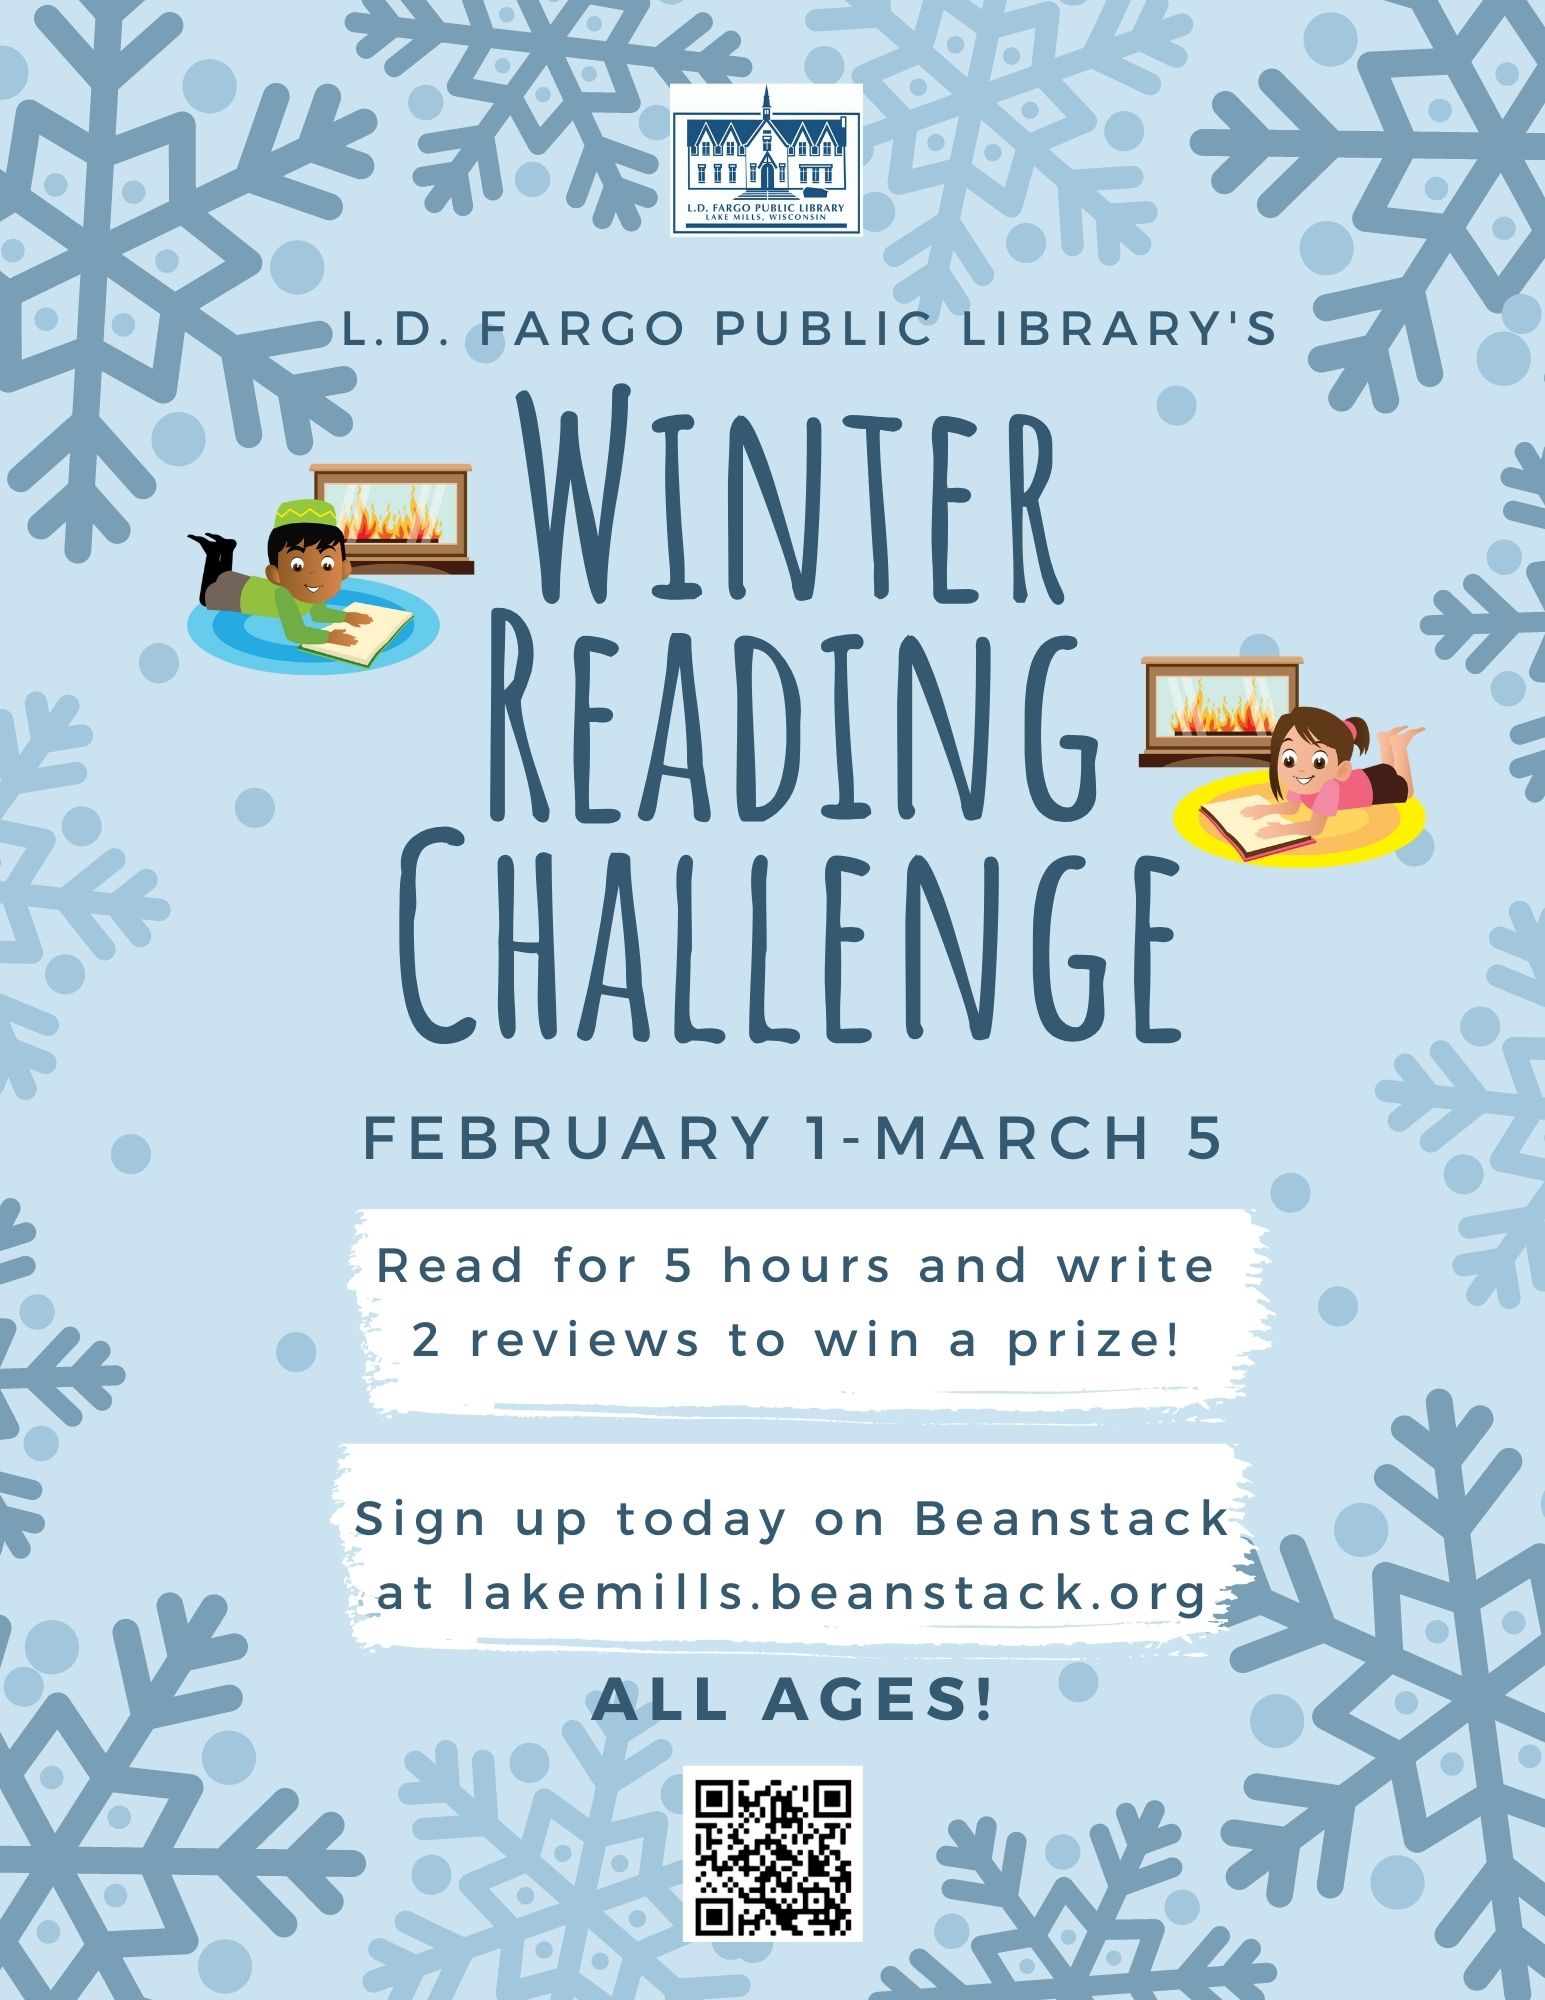 Registration starts January 10th  Starts February 1st-March 5th.   Read 5 hours and write 2 reviews to win a prize.   Sign up on Beanstack at lakemills.beanstack.org